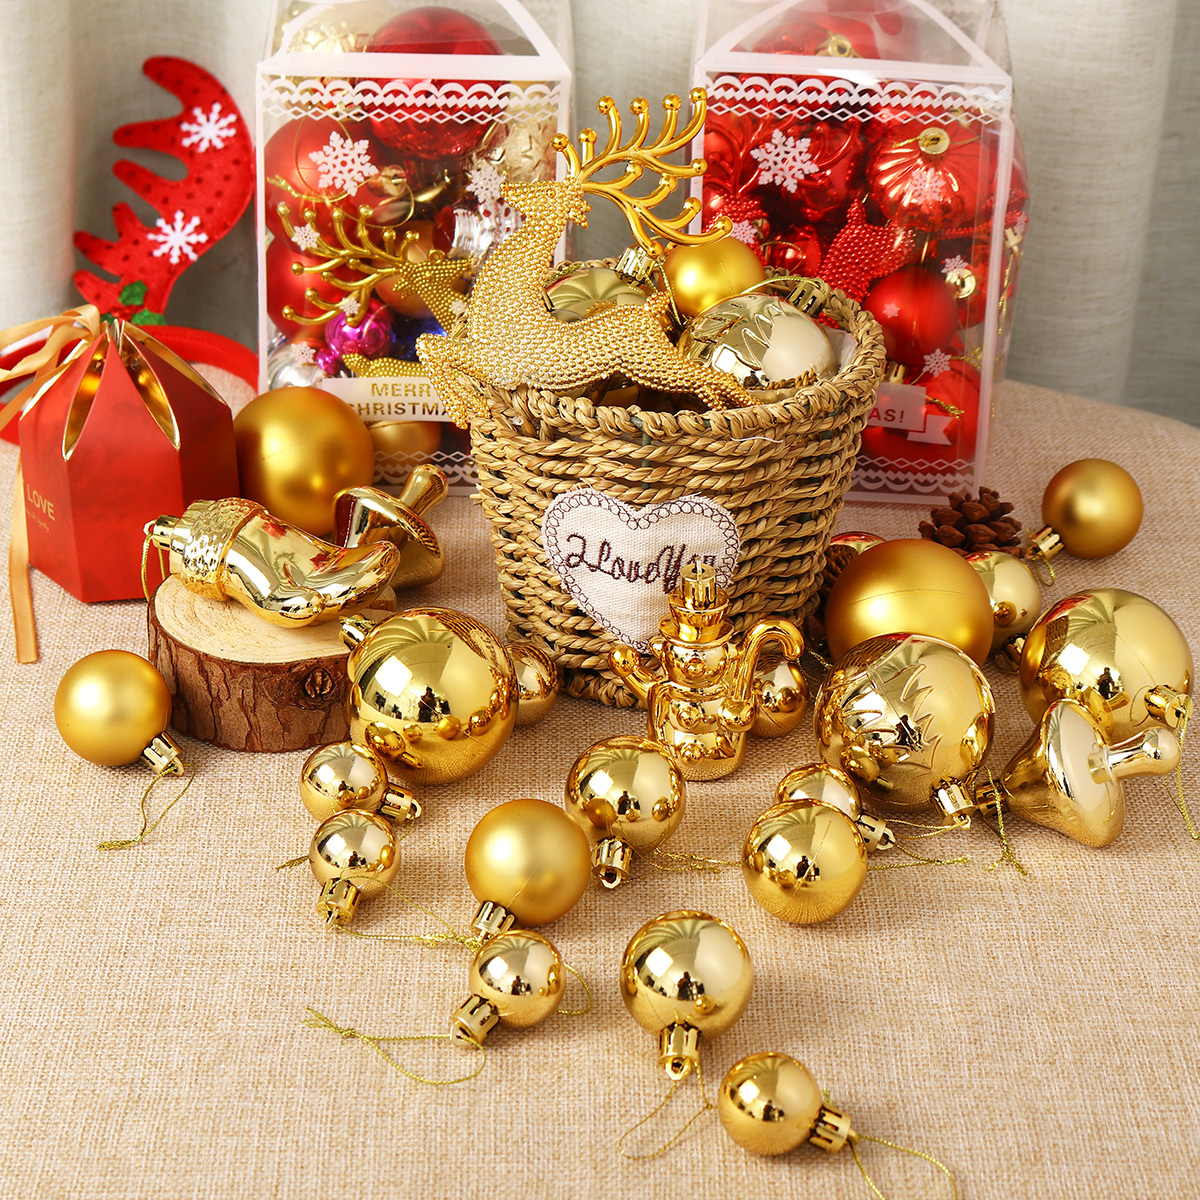 30-PcsSet-Glitter-Christmas-Tree-Ball-Baubles-Colorful-for-Xmas-Party-Home-Garden-Christmas-Decorati-1770980-2